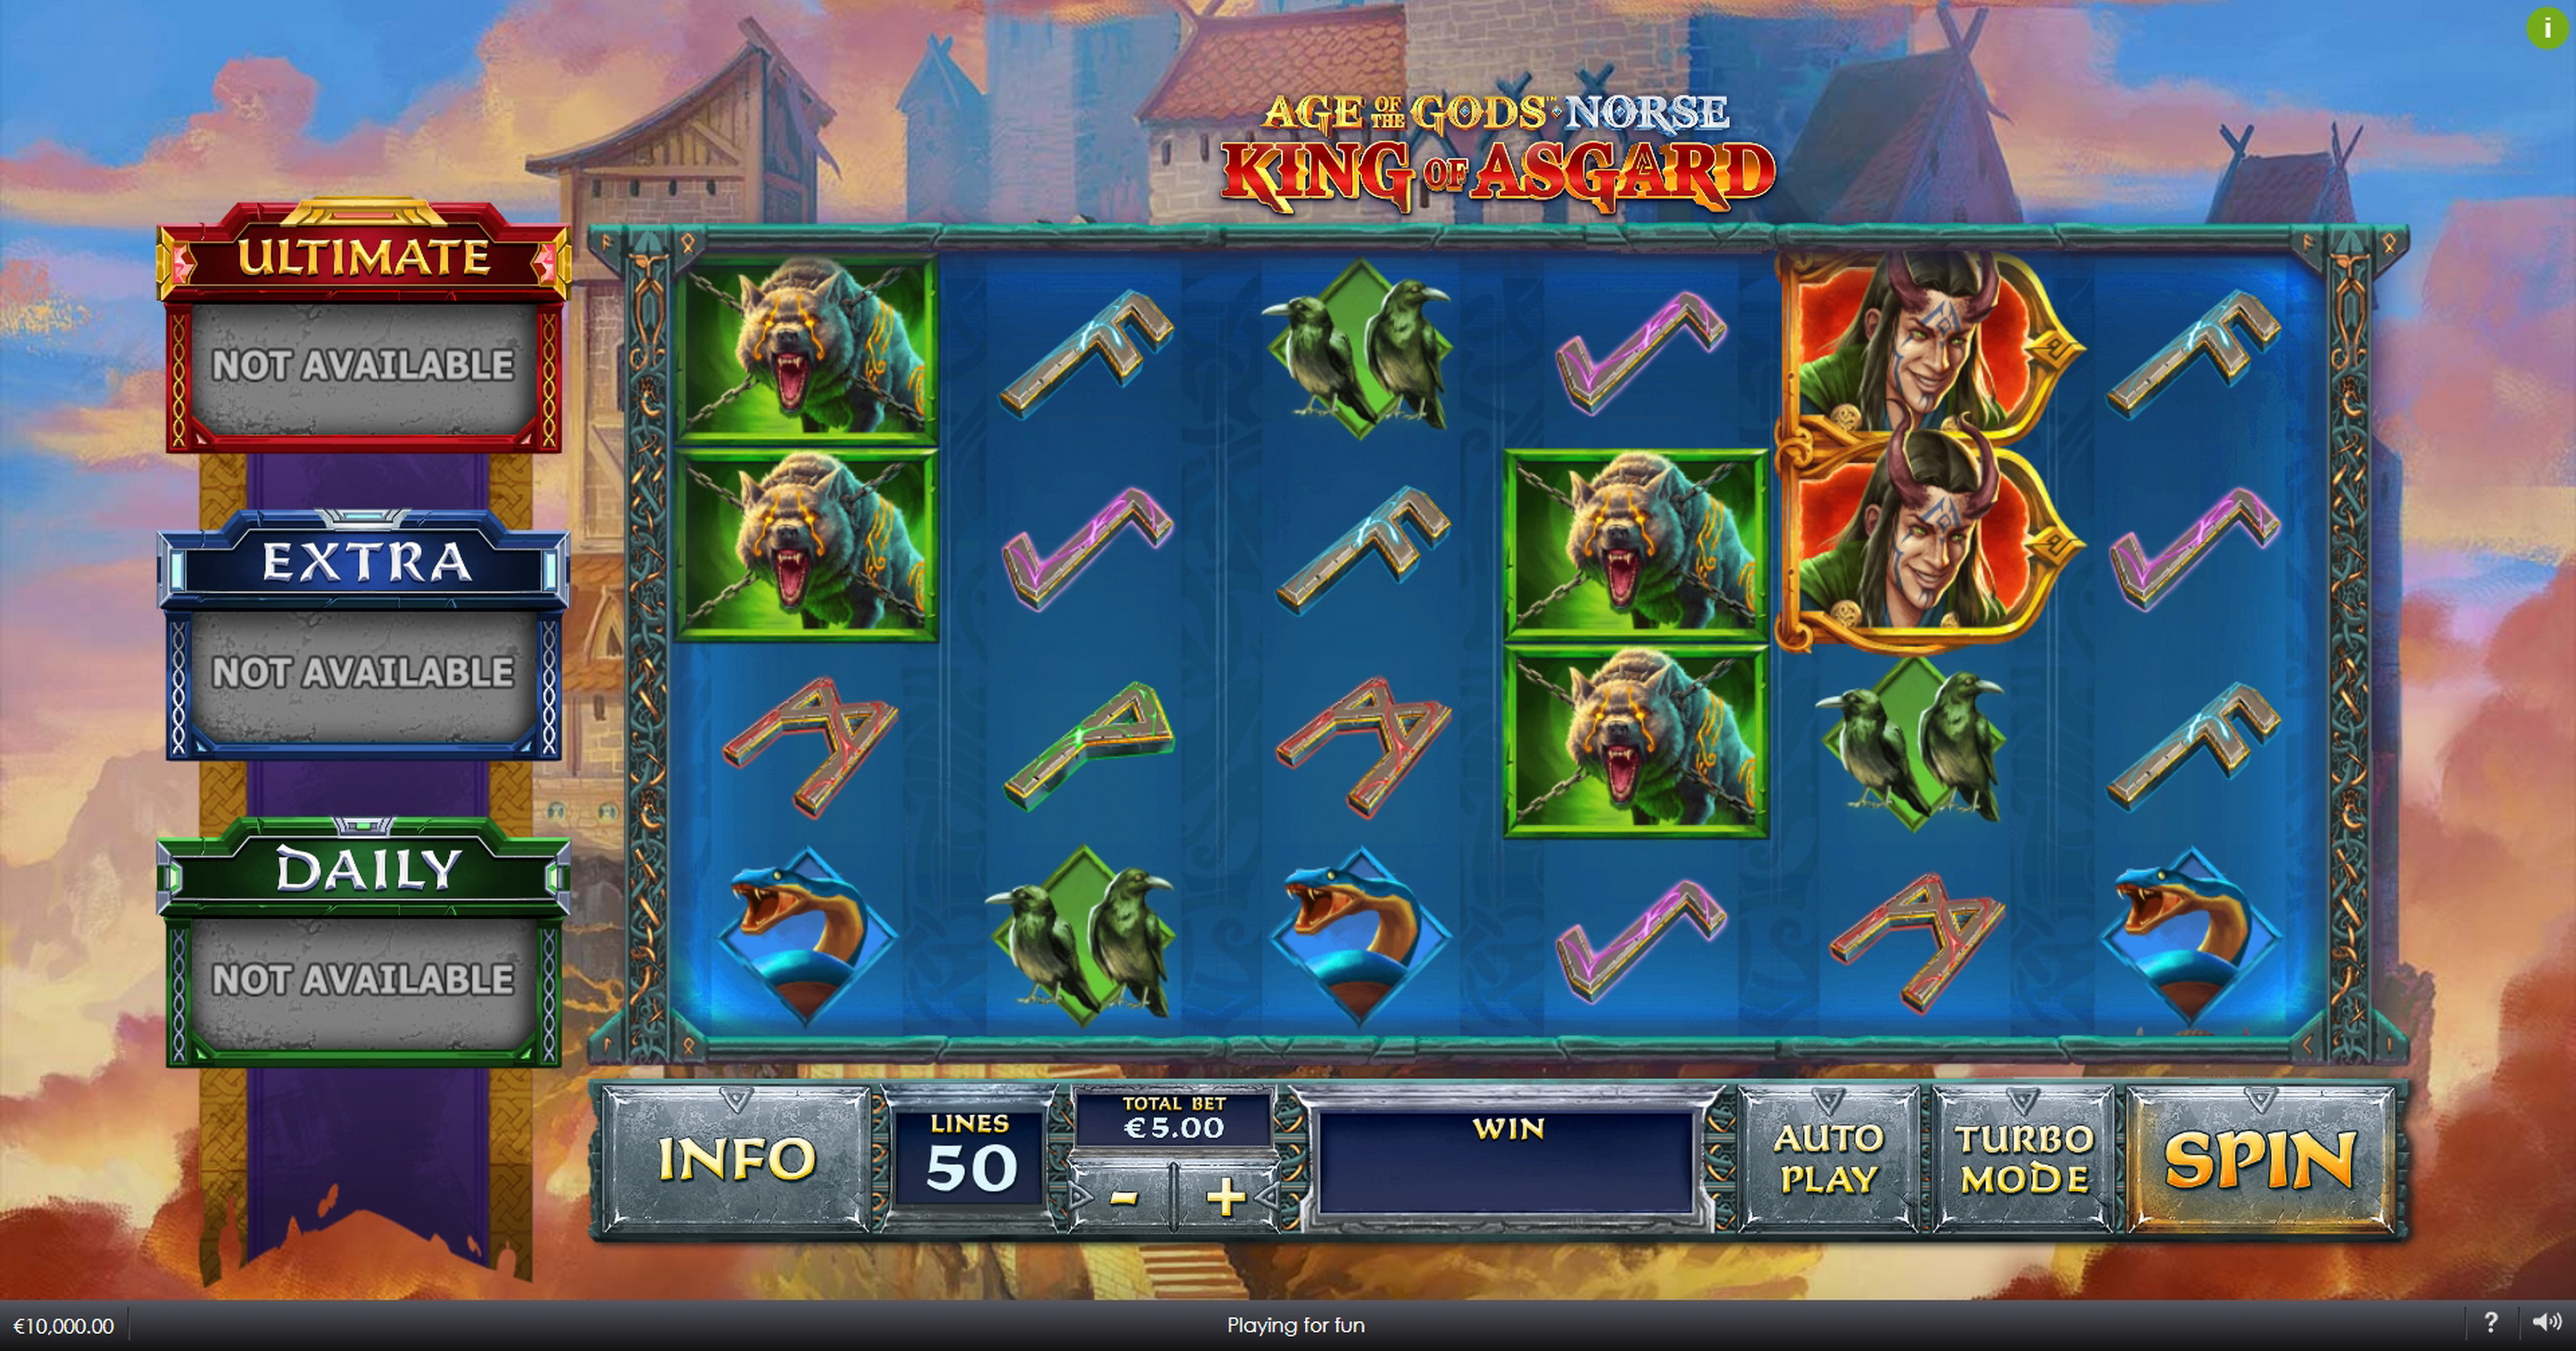 Reels in Age of the Gods Norse King of Asgard Slot Game by Ash Gaming